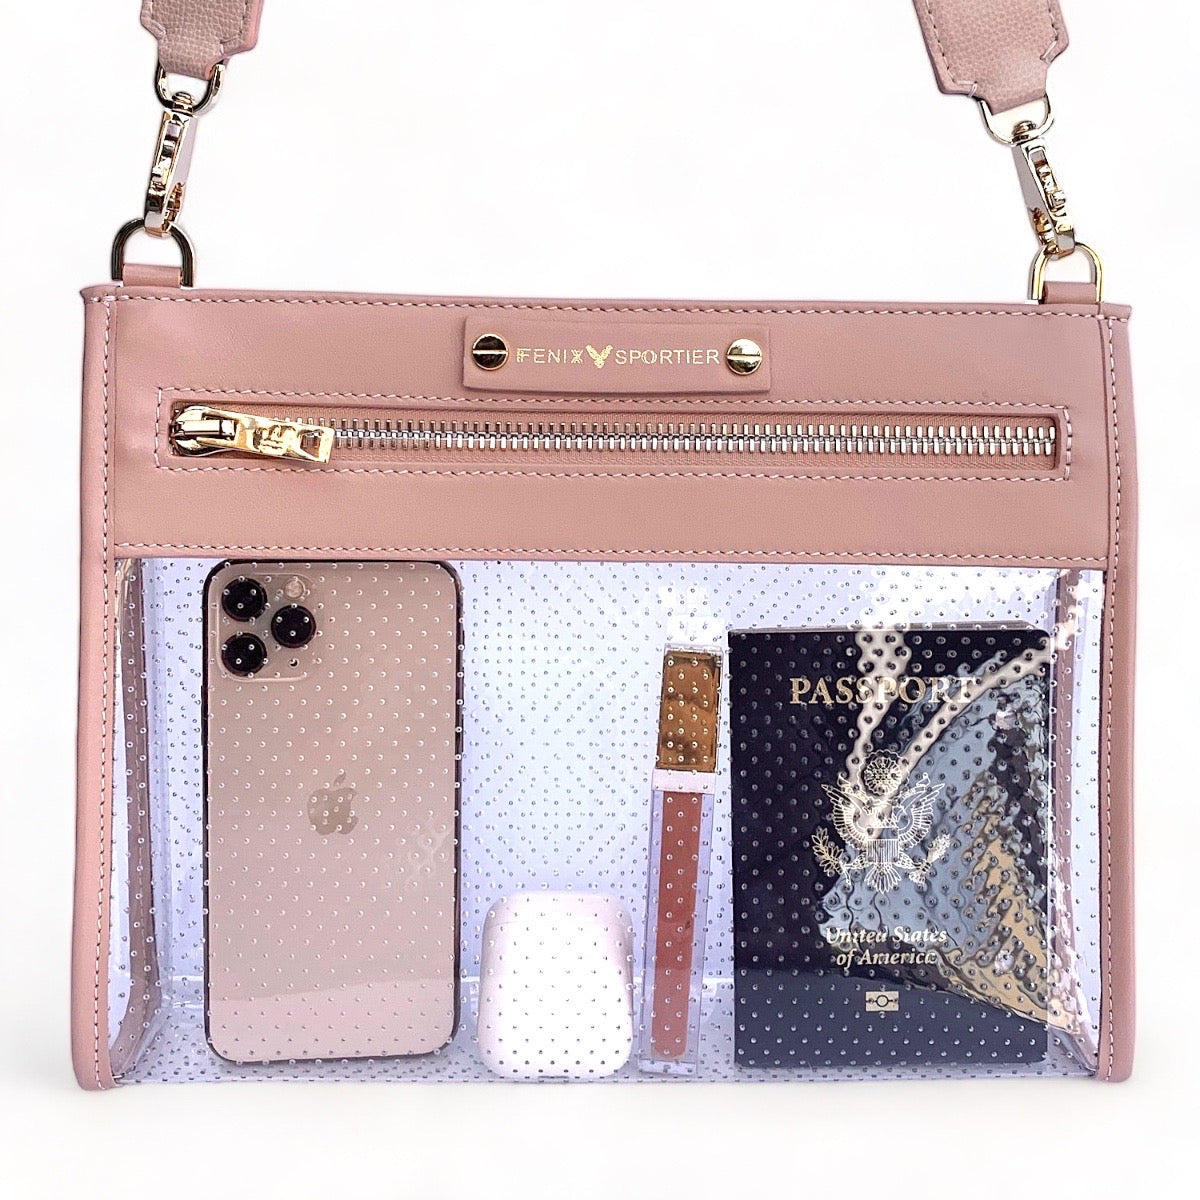 Front Row Bag - Blush Leather / Clear PVC